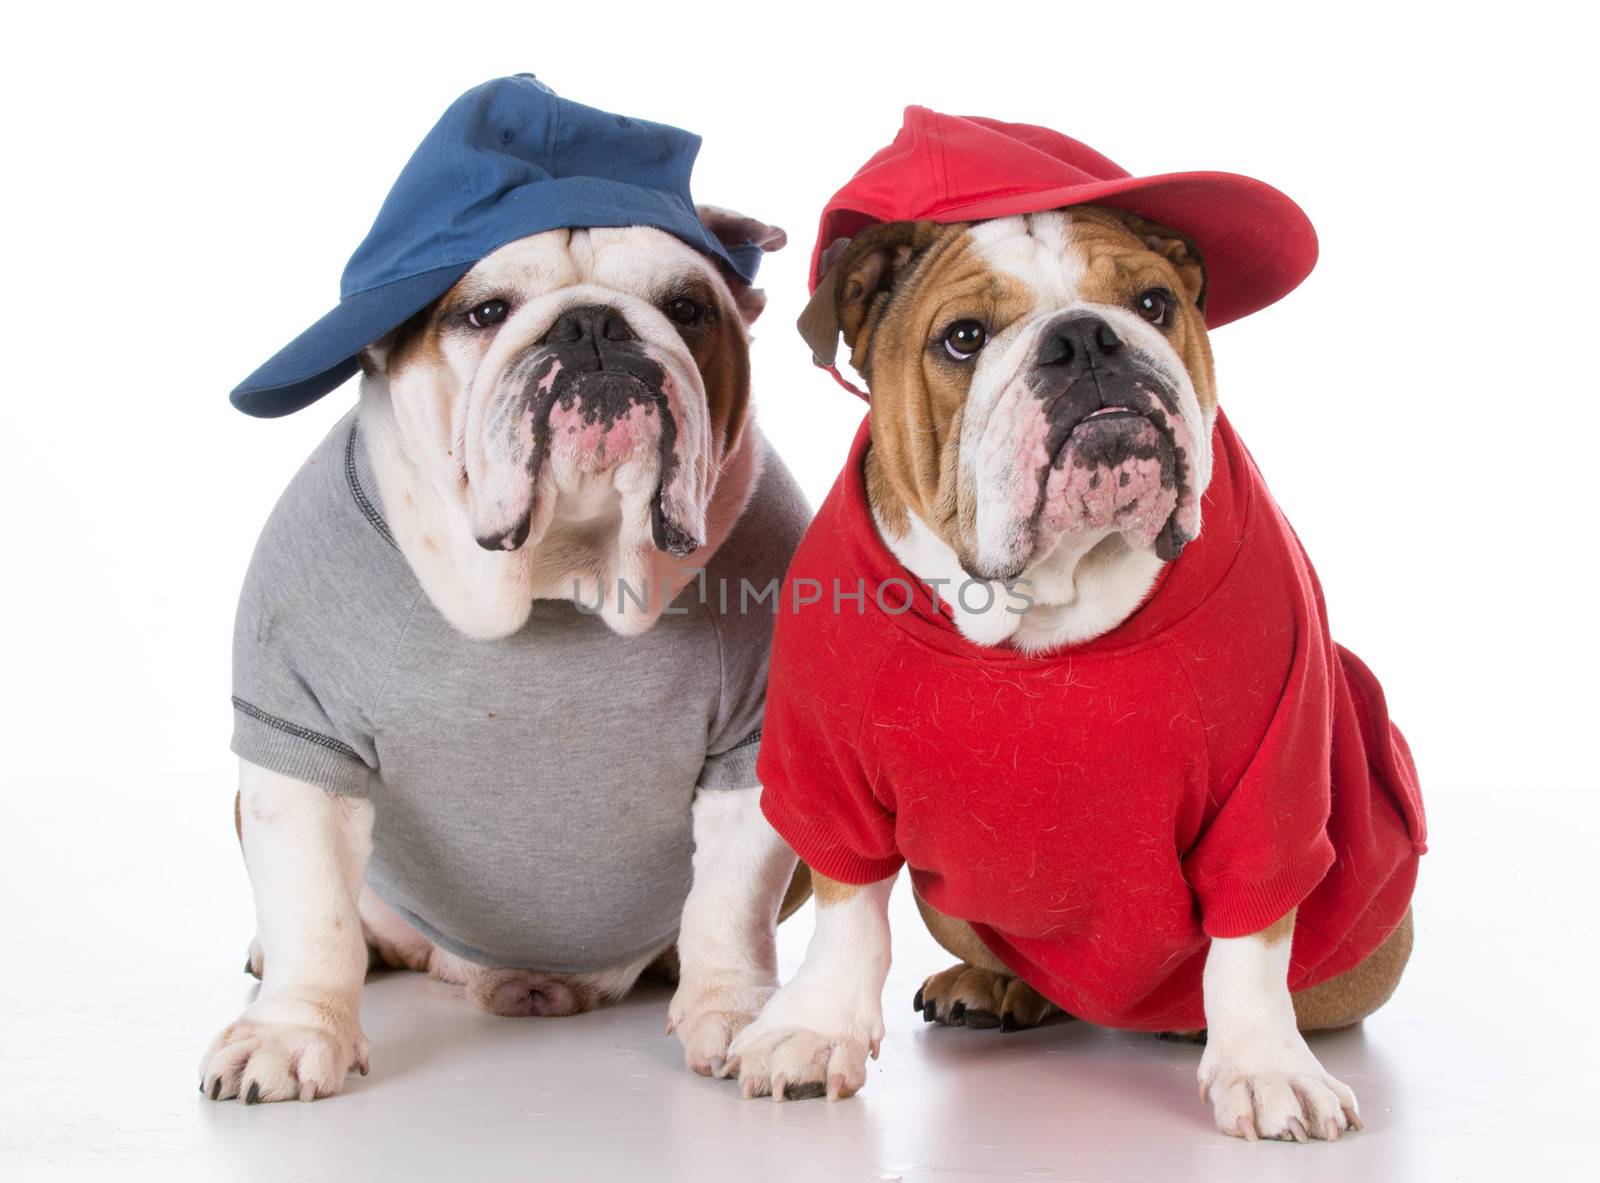 two english bulldogs wearing sweaters and hats on white background